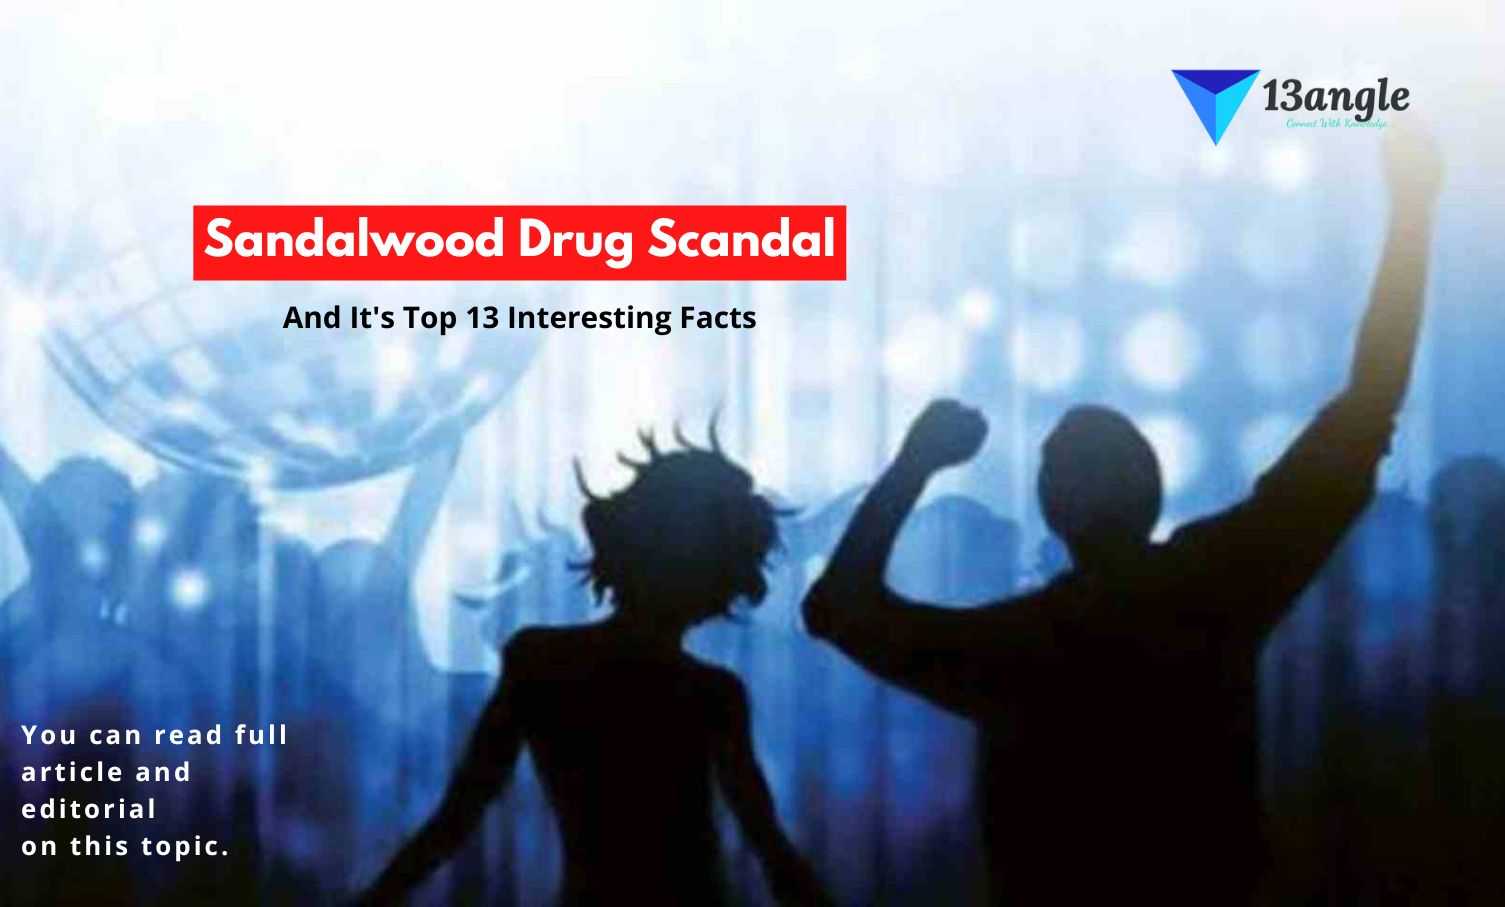 Sandalwood Drug Scandal And It's Top 13 Interesting Facts- 13angle.com